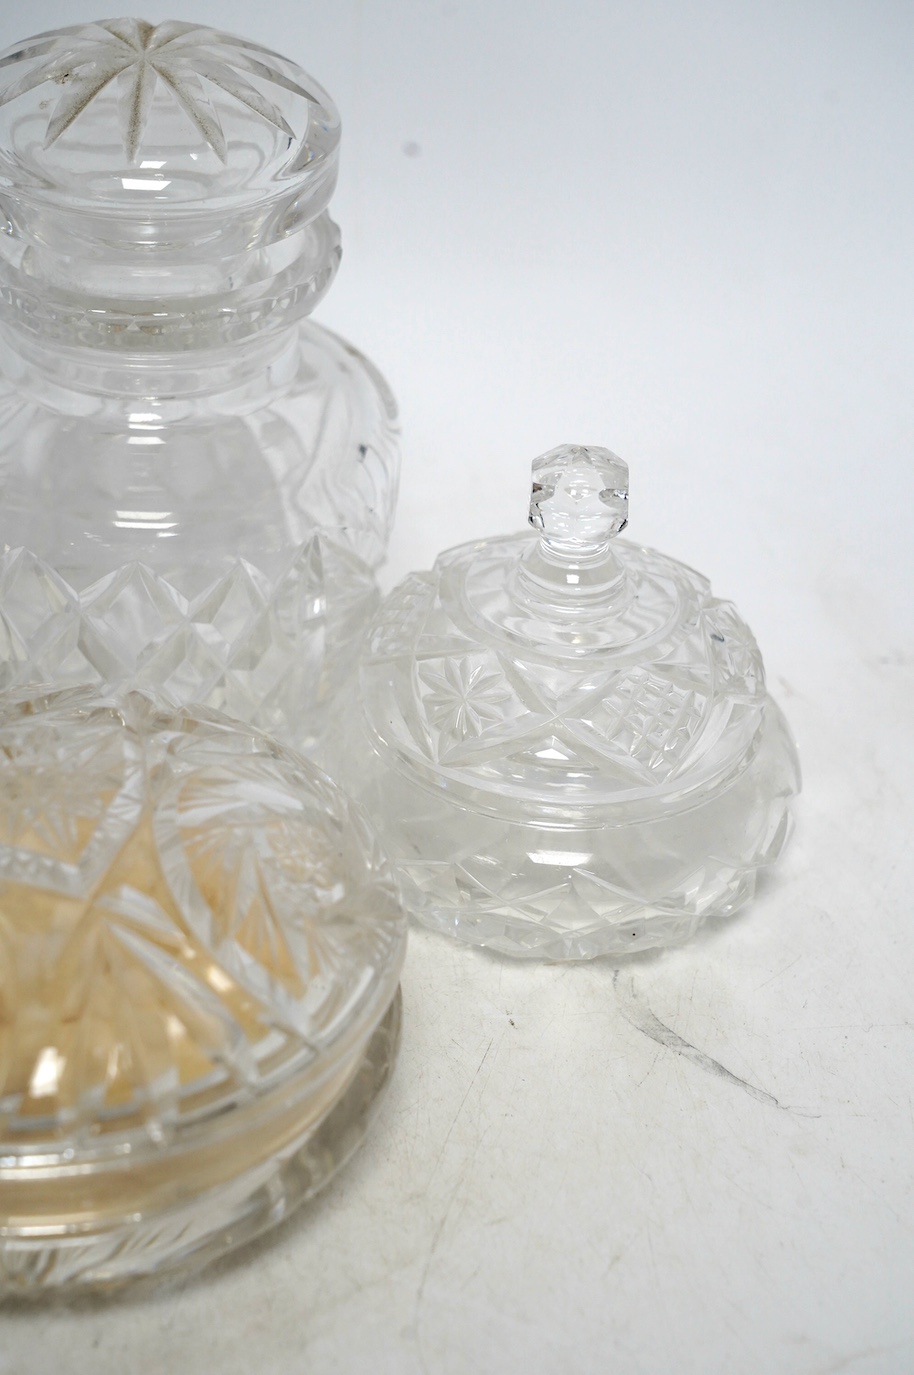 Six cut glass dressing table bottles and bowls, including a bottle with an 800 standard, large white metal cover, 800 standard bottle 16cm high. Condition - fair to good